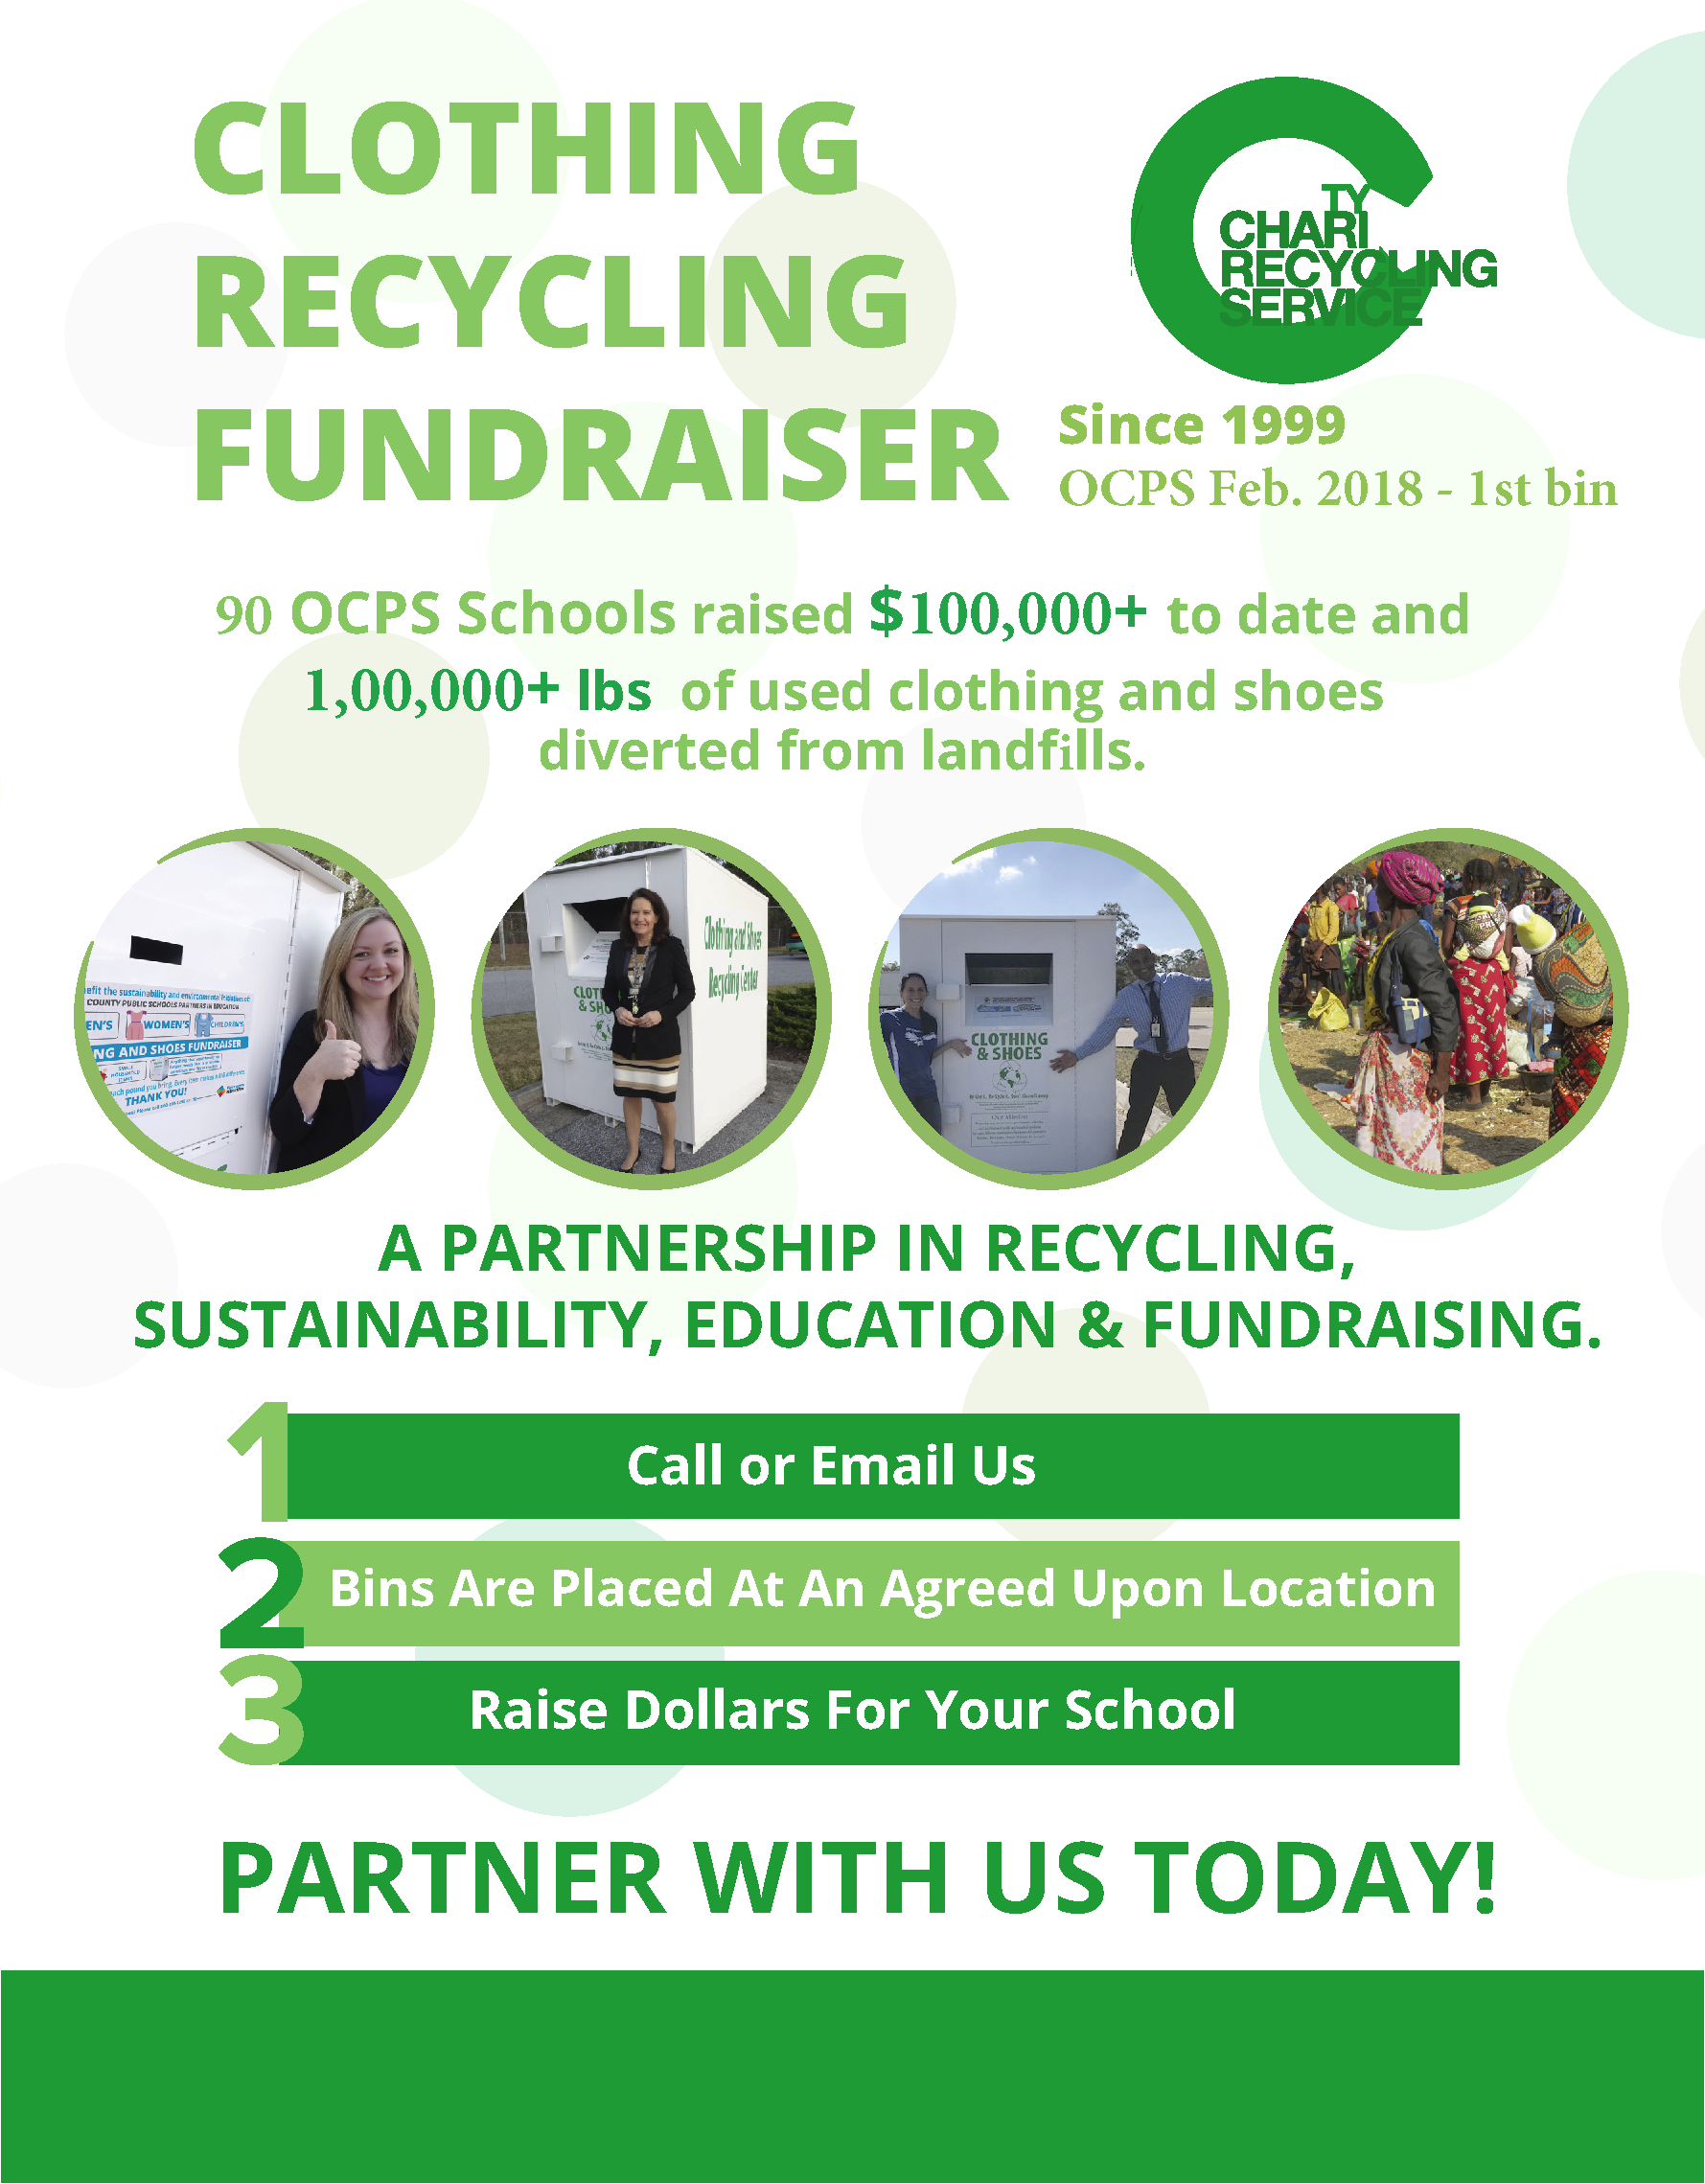 The Foundation for OCPS - Information on Recycling Program